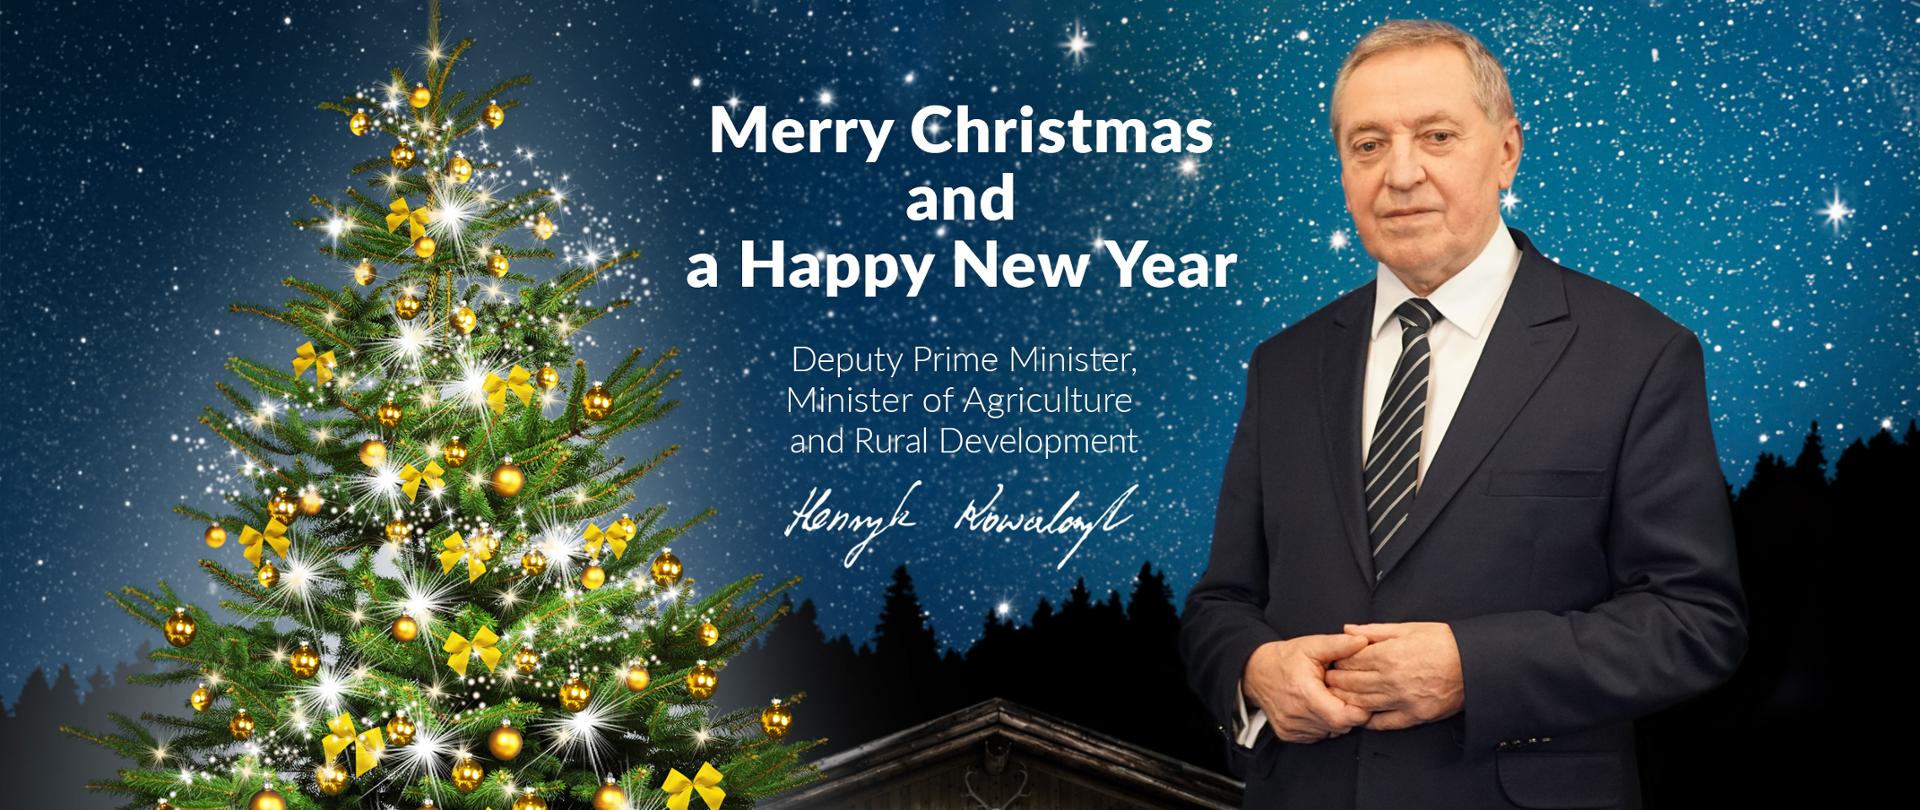 Christmas wishes from the Deputy Prime Minister, Minister of Agriculture and Rural Development, Henryk Kowalczyk